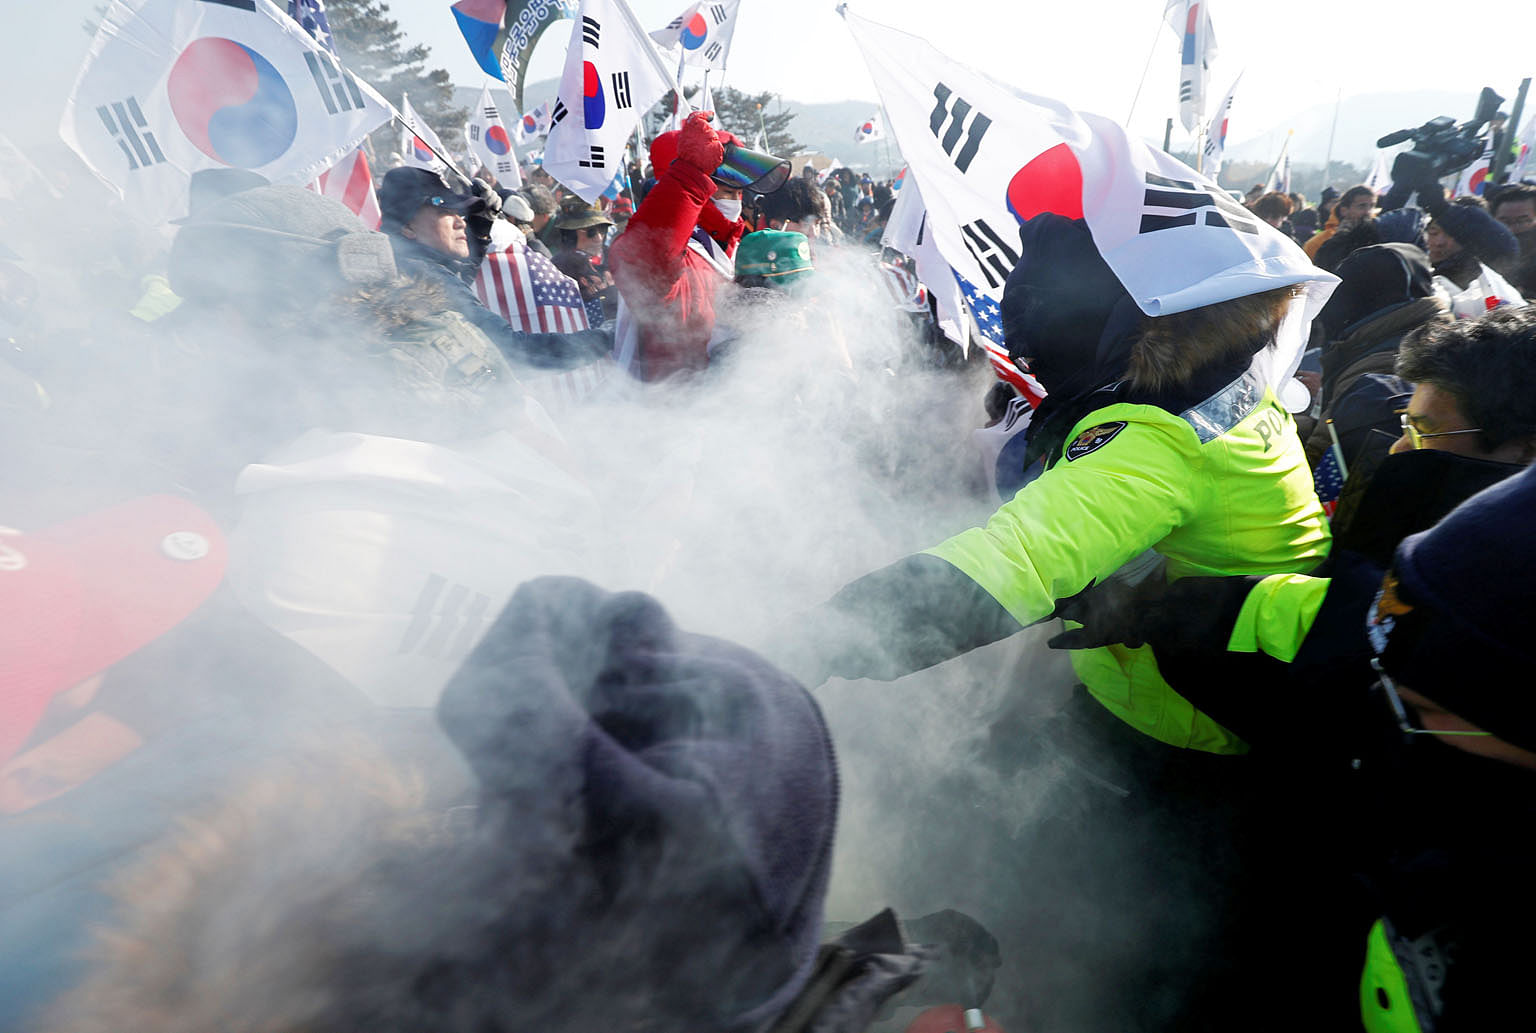 Police (in green) try to stop demonstrators during an anti-North Korea protest in Pyeongchang yesterday. Seoul is hoping this Winter Olympics will be a "Peace Olympics", though Washington and other parties are concerned that the games may be exploite